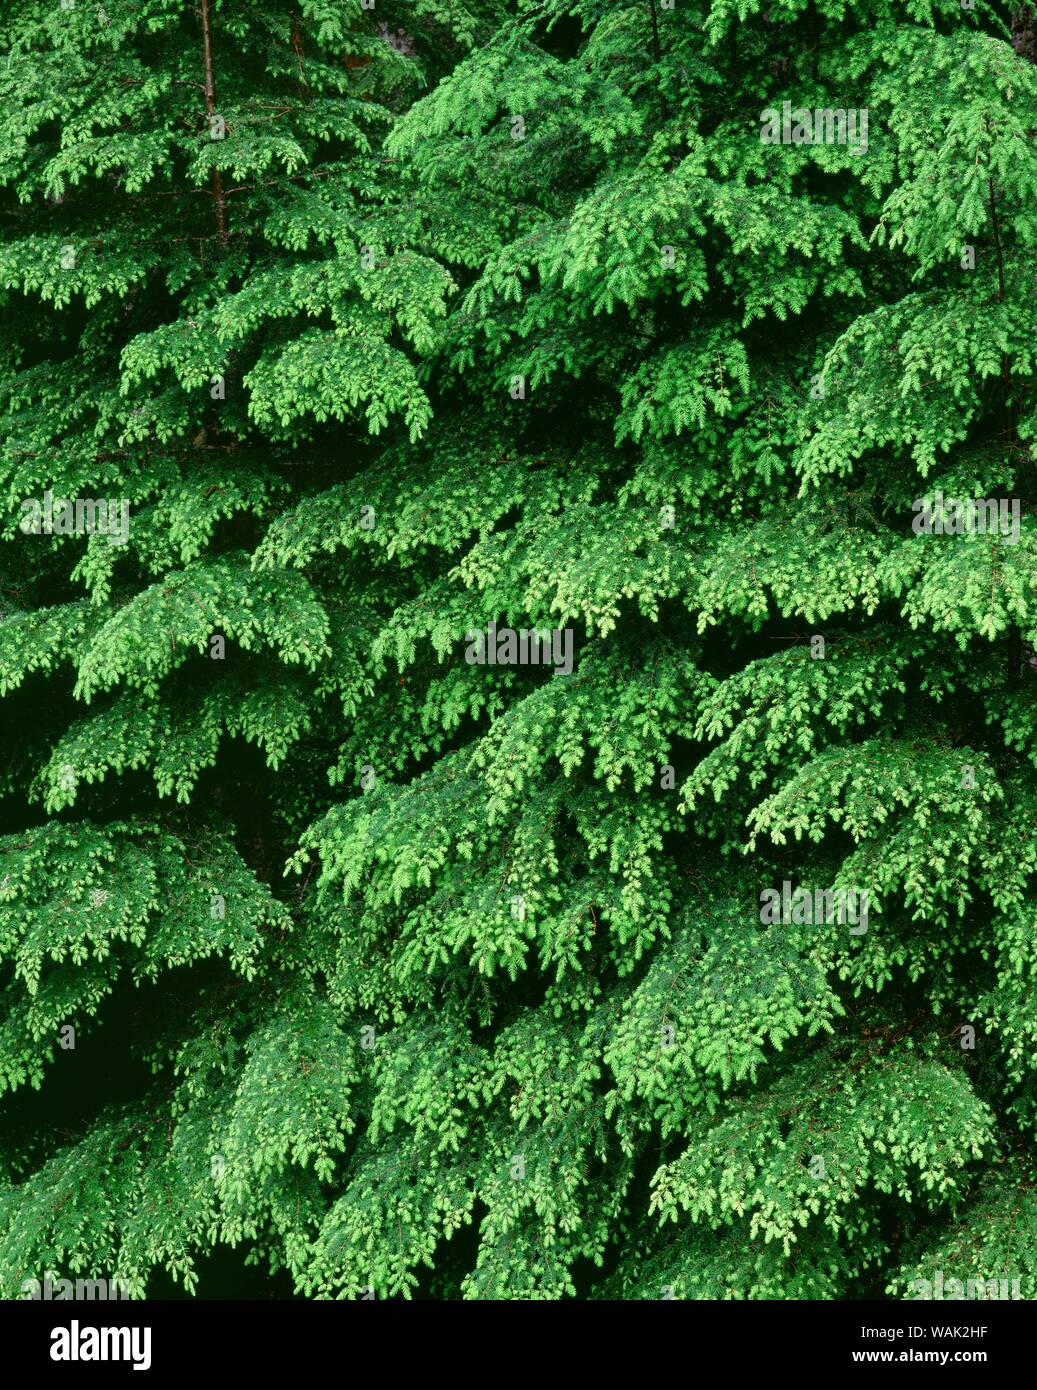 USA, Oregon, Willamette National Forest. New spring growth of western hemlock trees. Stock Photo